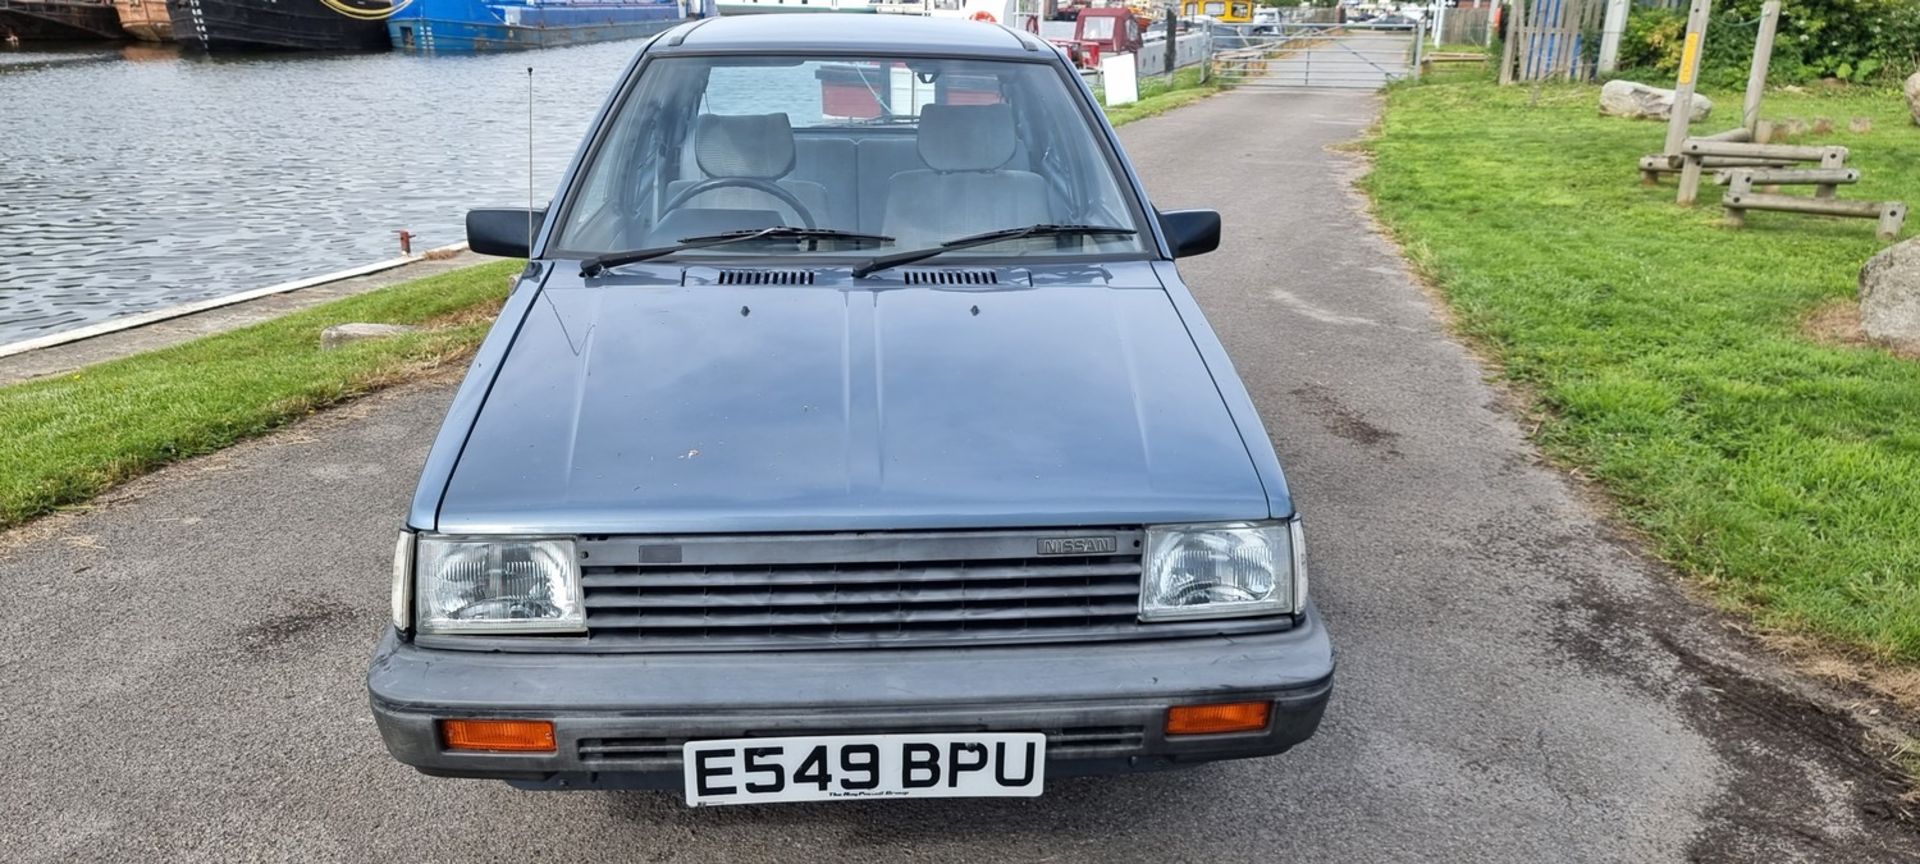 1987 Nissan Micra SGL automatic, 998cc. Registration number E549 BPU. Chassis number K10 429826. - Image 5 of 15